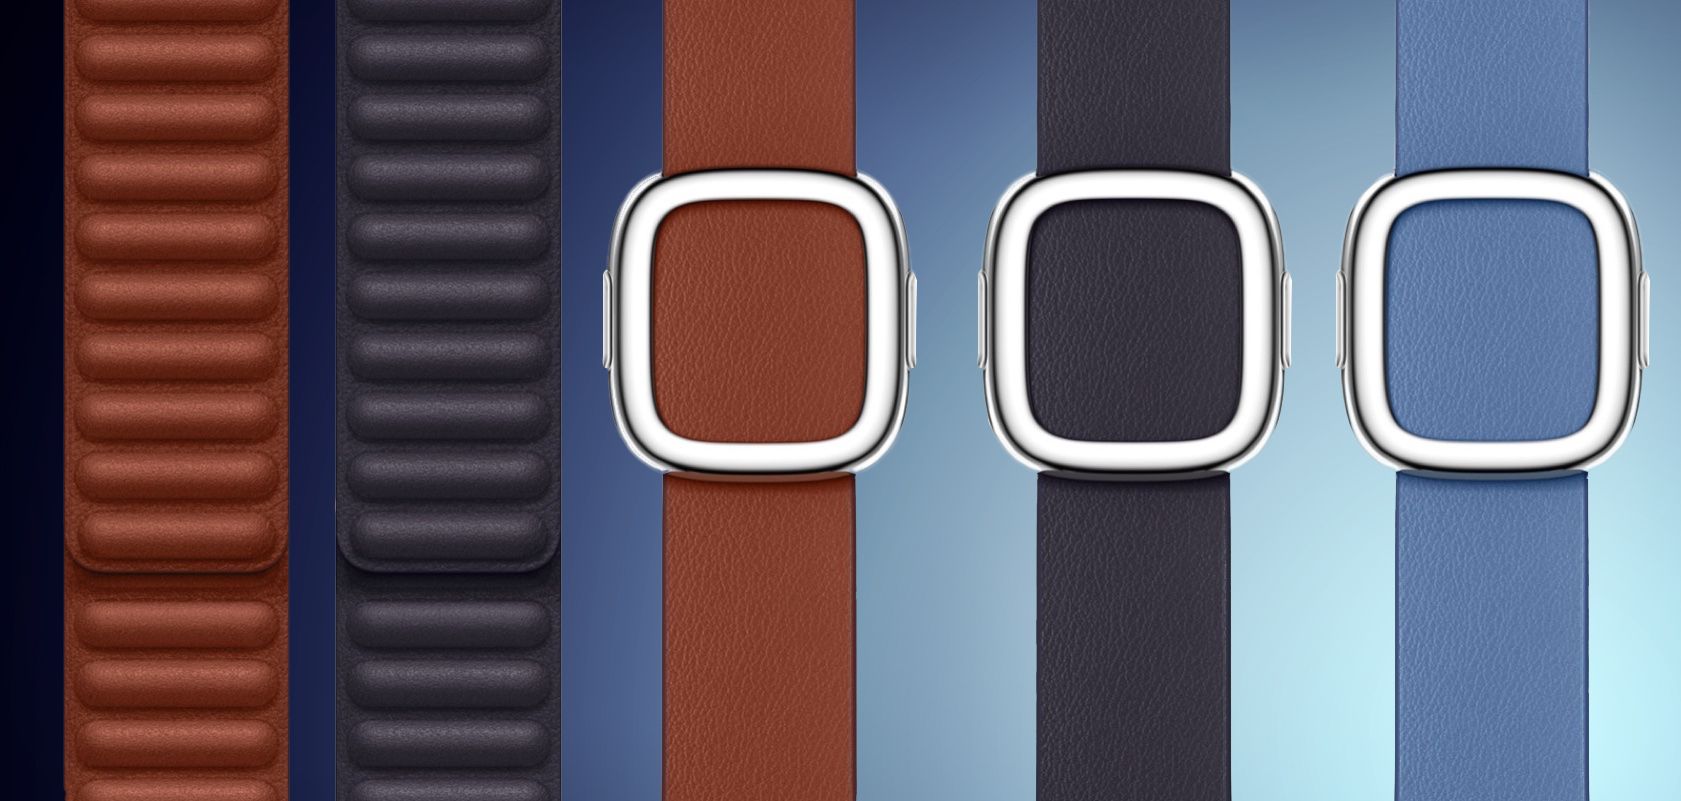 Apple Watch Leather Bands May Be Discontinued for Series 9 - macrumors.com